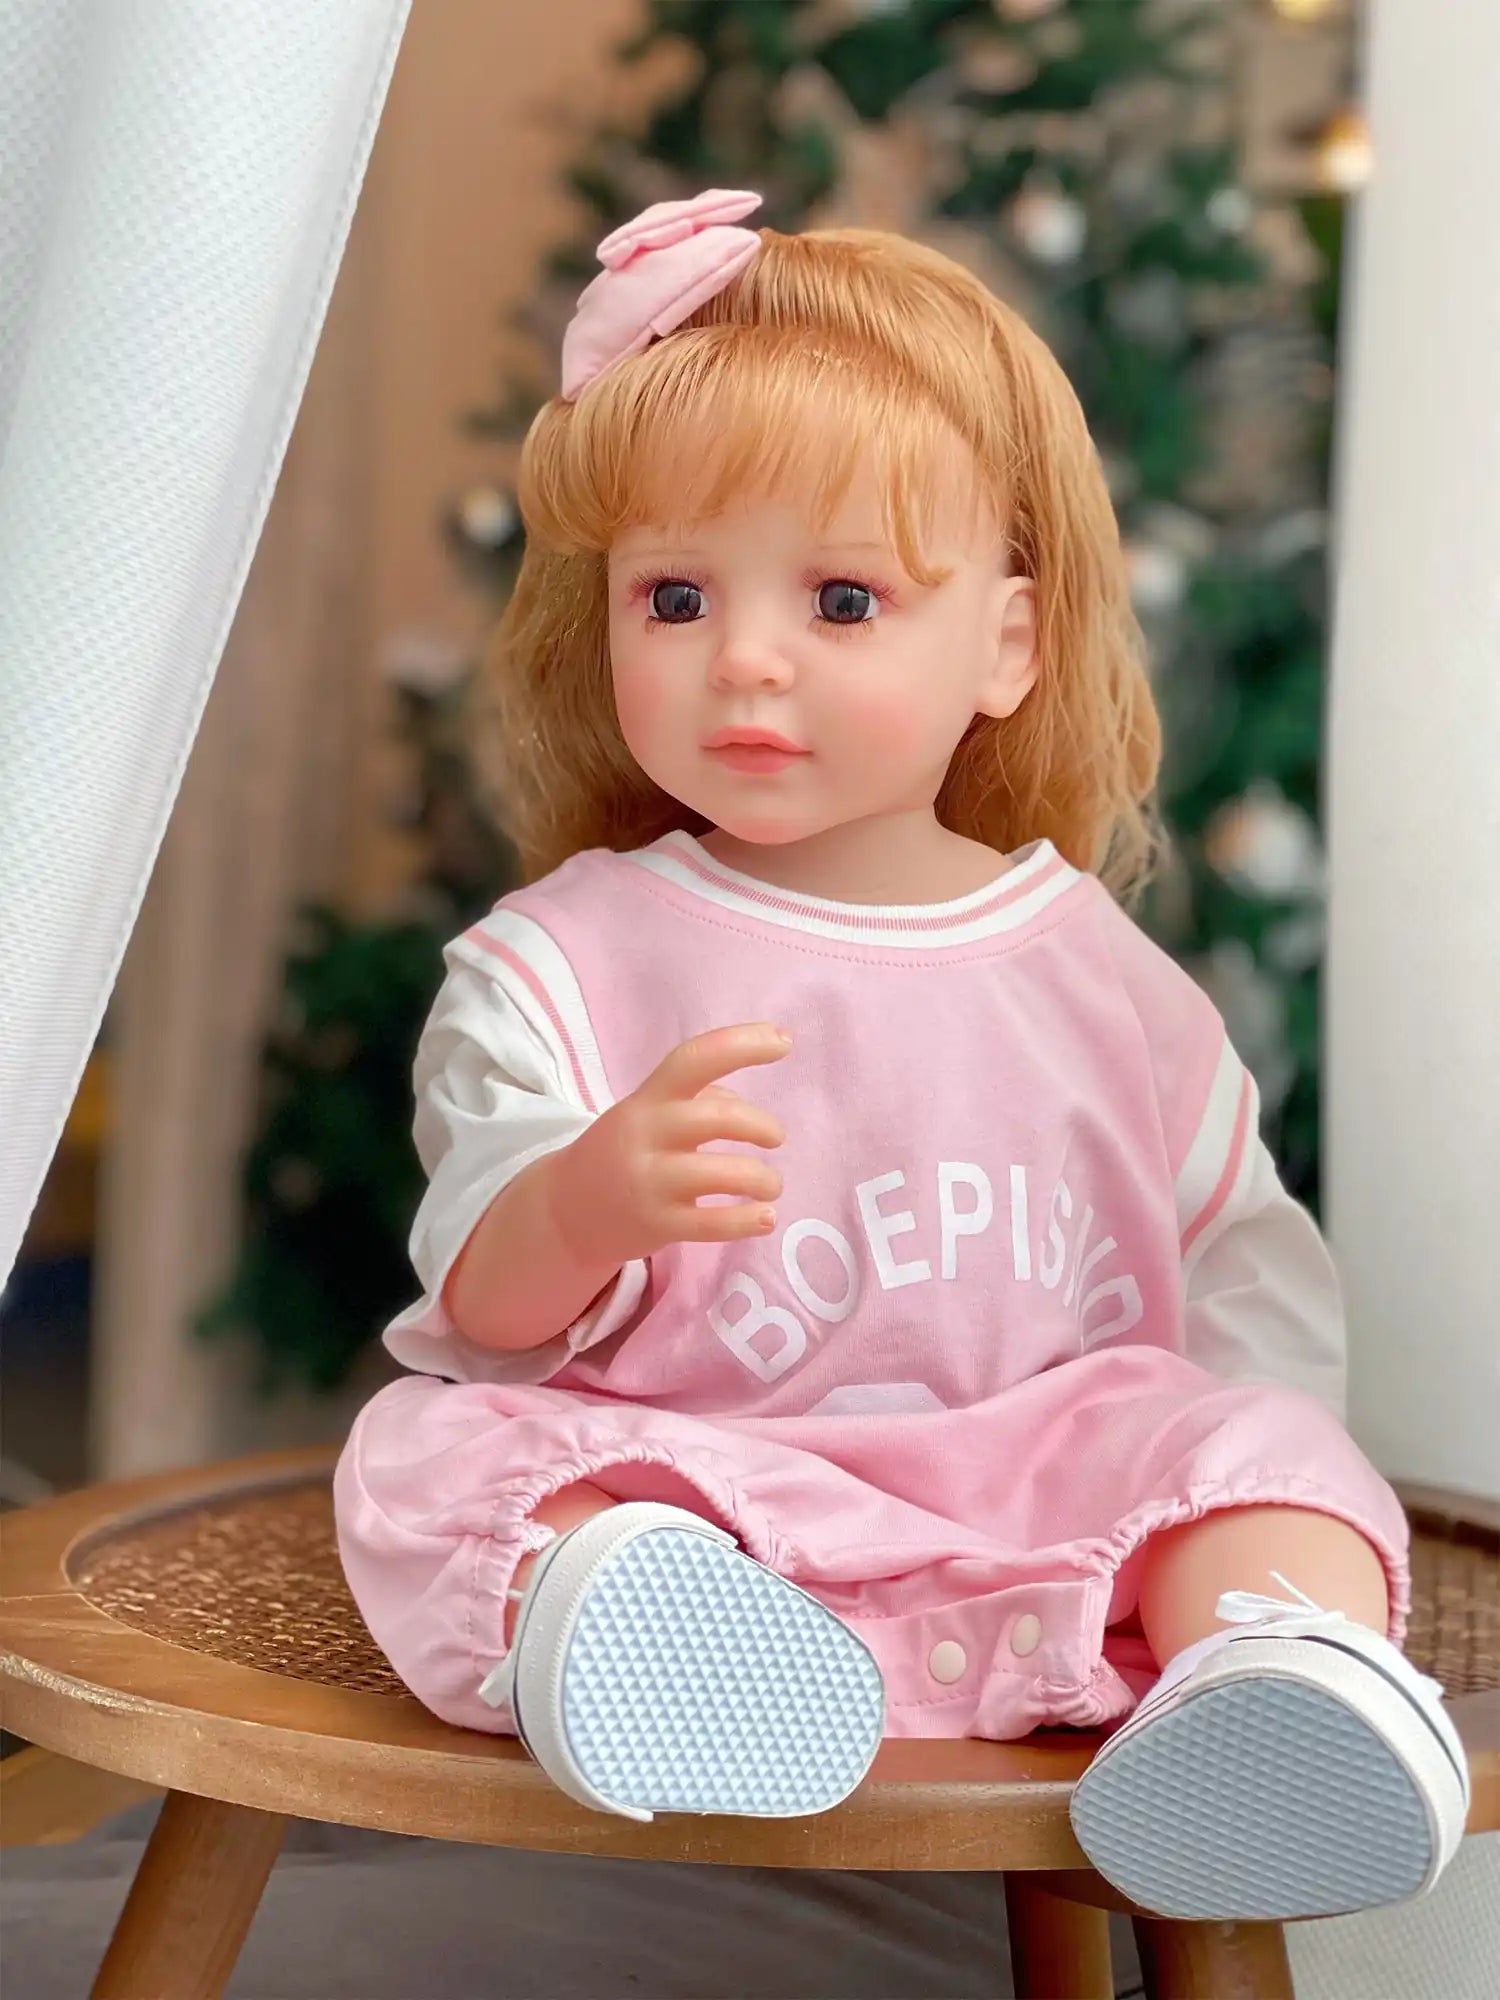 Lifelike doll seated on a woven chair, sporting a casual pink outfit, with a festive Christmas tree in the background.